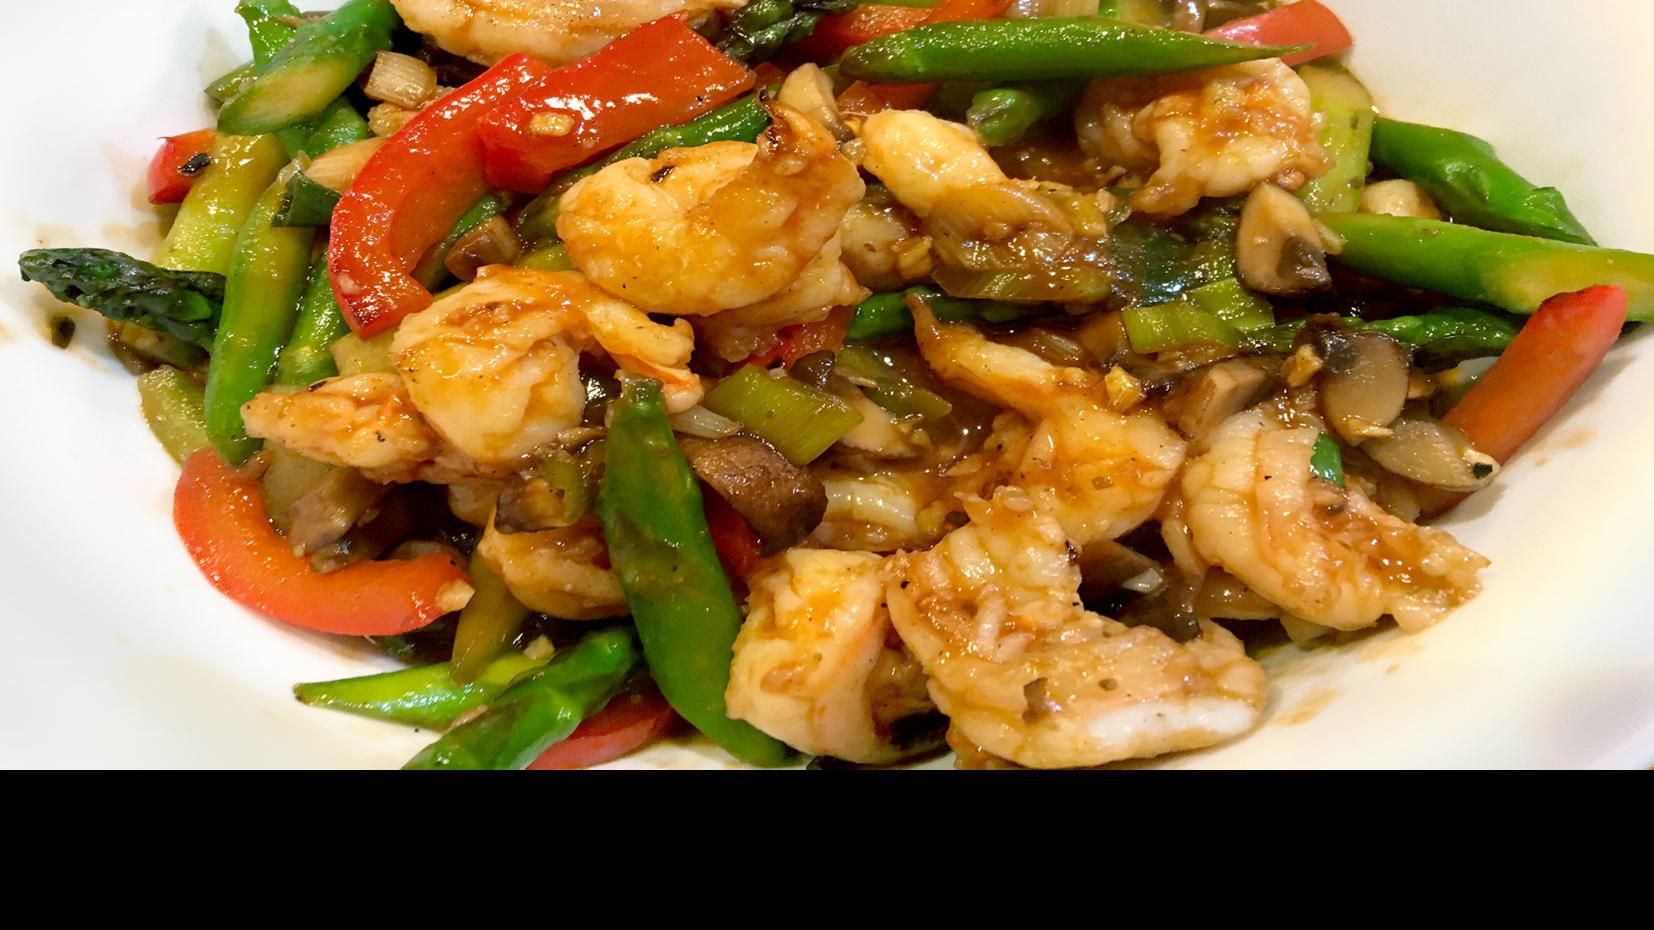 This Classic Shrimp And Vegetable Stir Fry Is Quick And Delicious Food Cooking Mtstandard Com